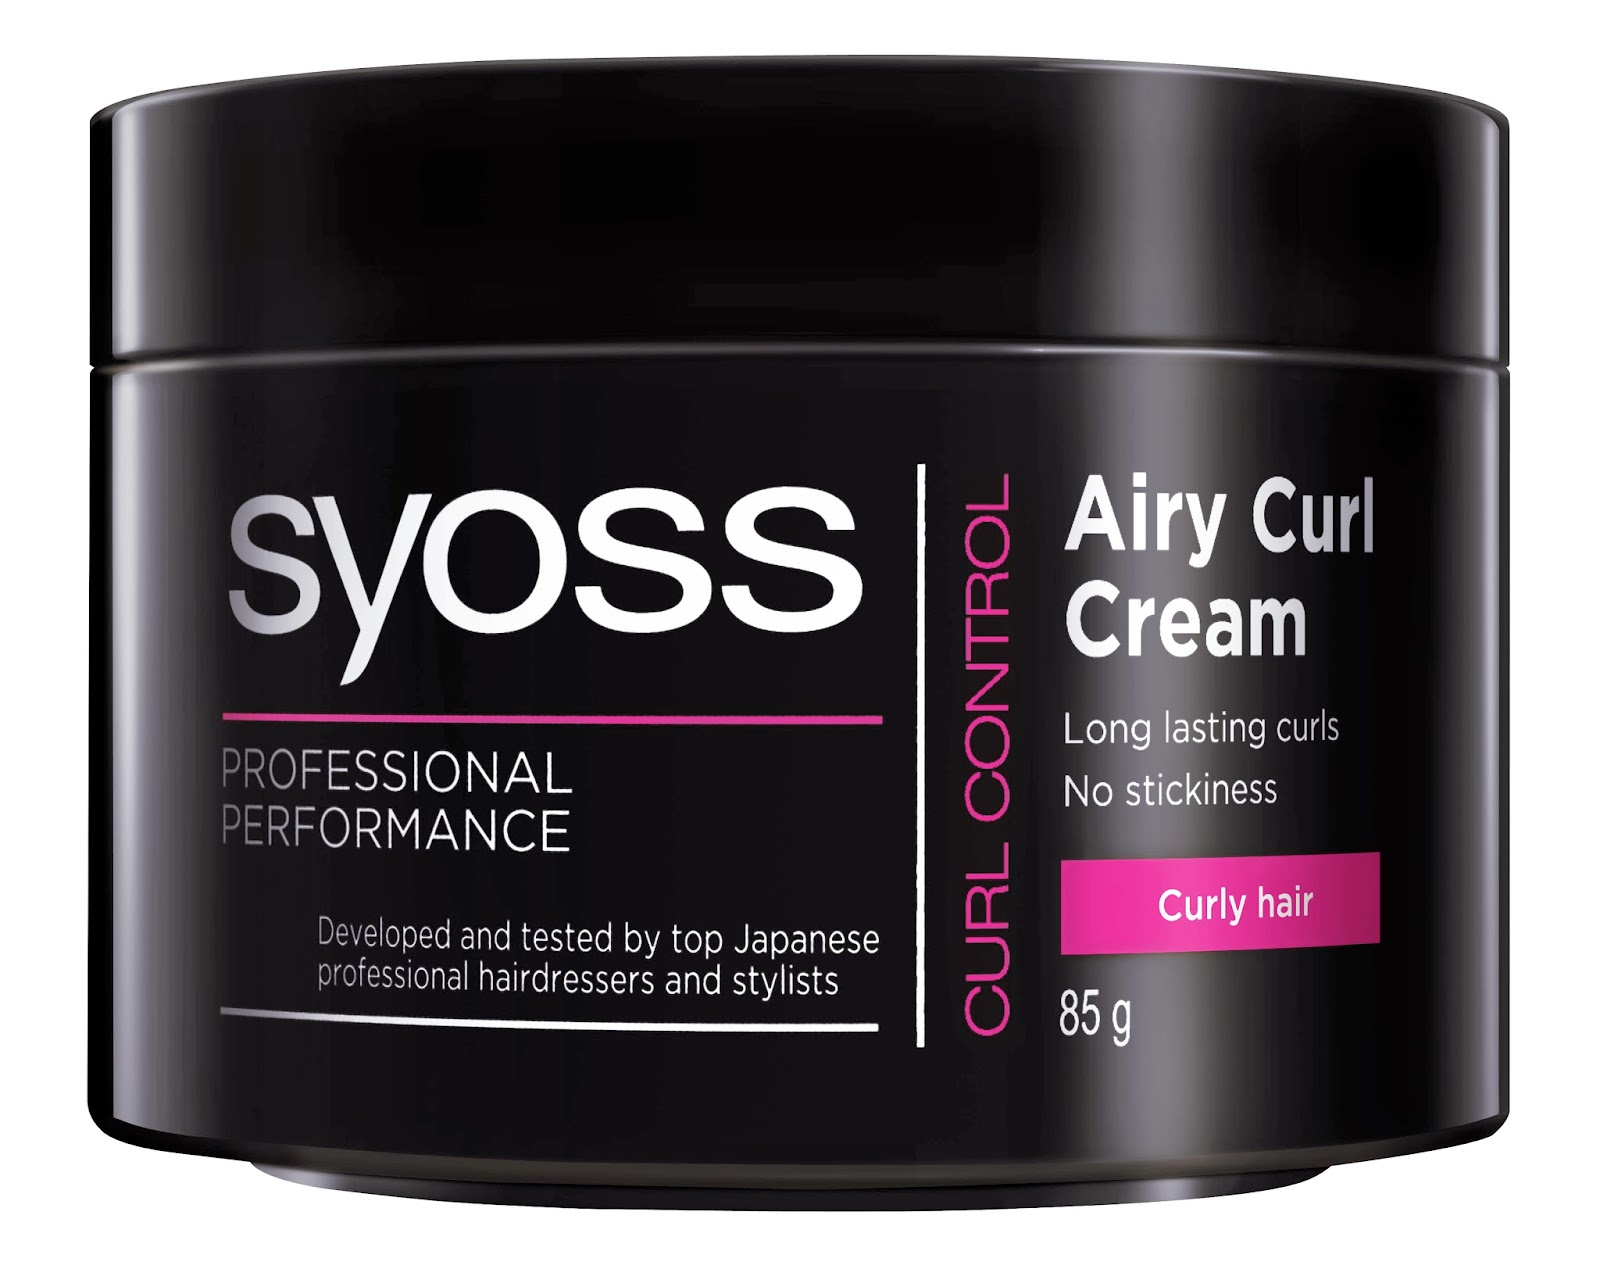 New Hair Care SYOSS is now available in Malaysia 